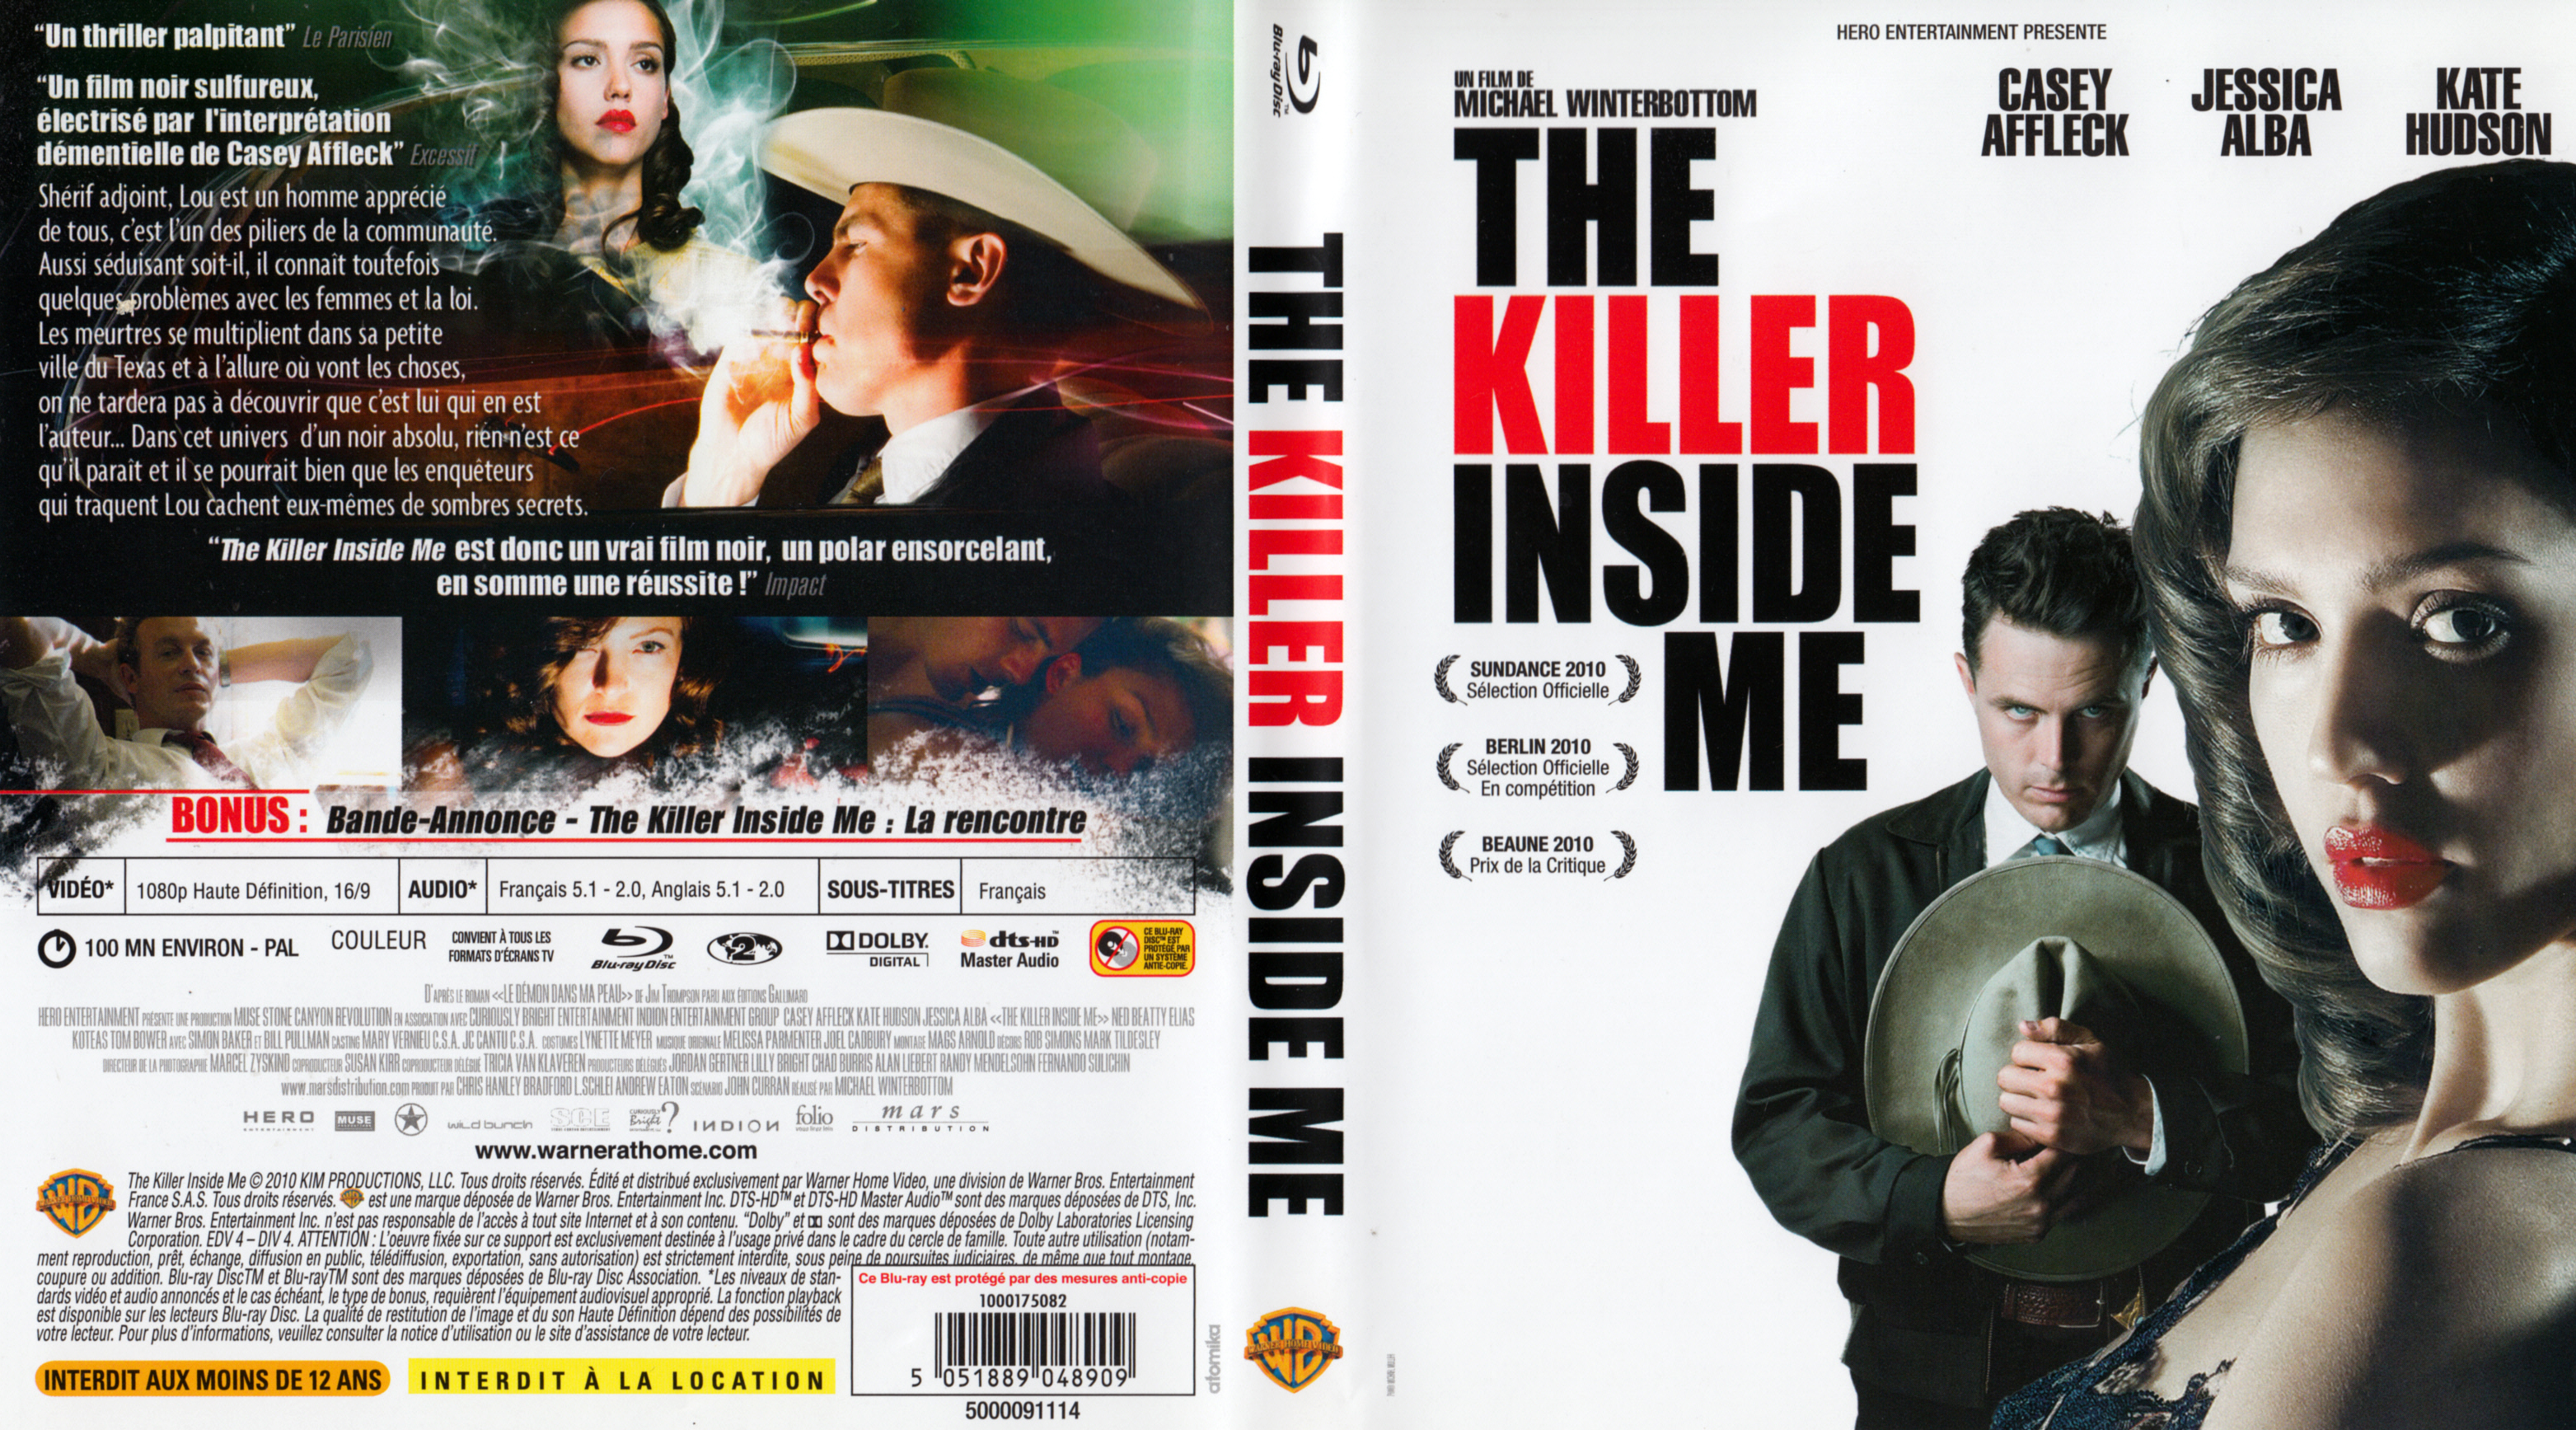 Jaquette DVD The killer inside me (BLU-RAY)